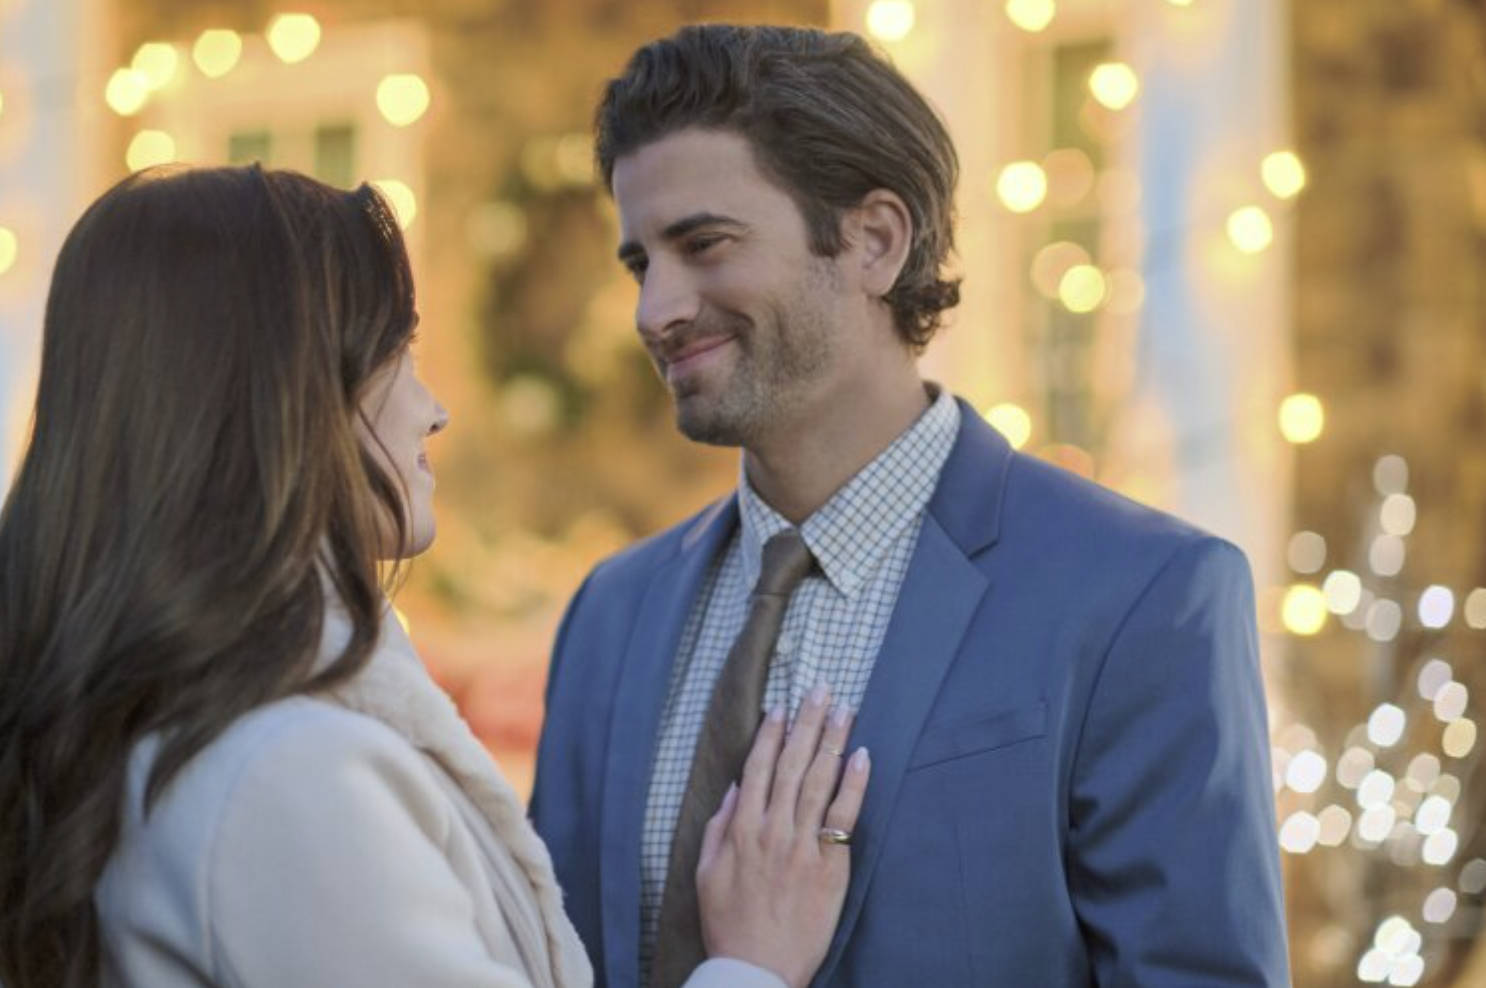 Hallmark Movies & Mysteries Original Premiere of "Christmas For Keeps" on Saturday, December 18th at 10pm/9c #MiraclesOfChristmas